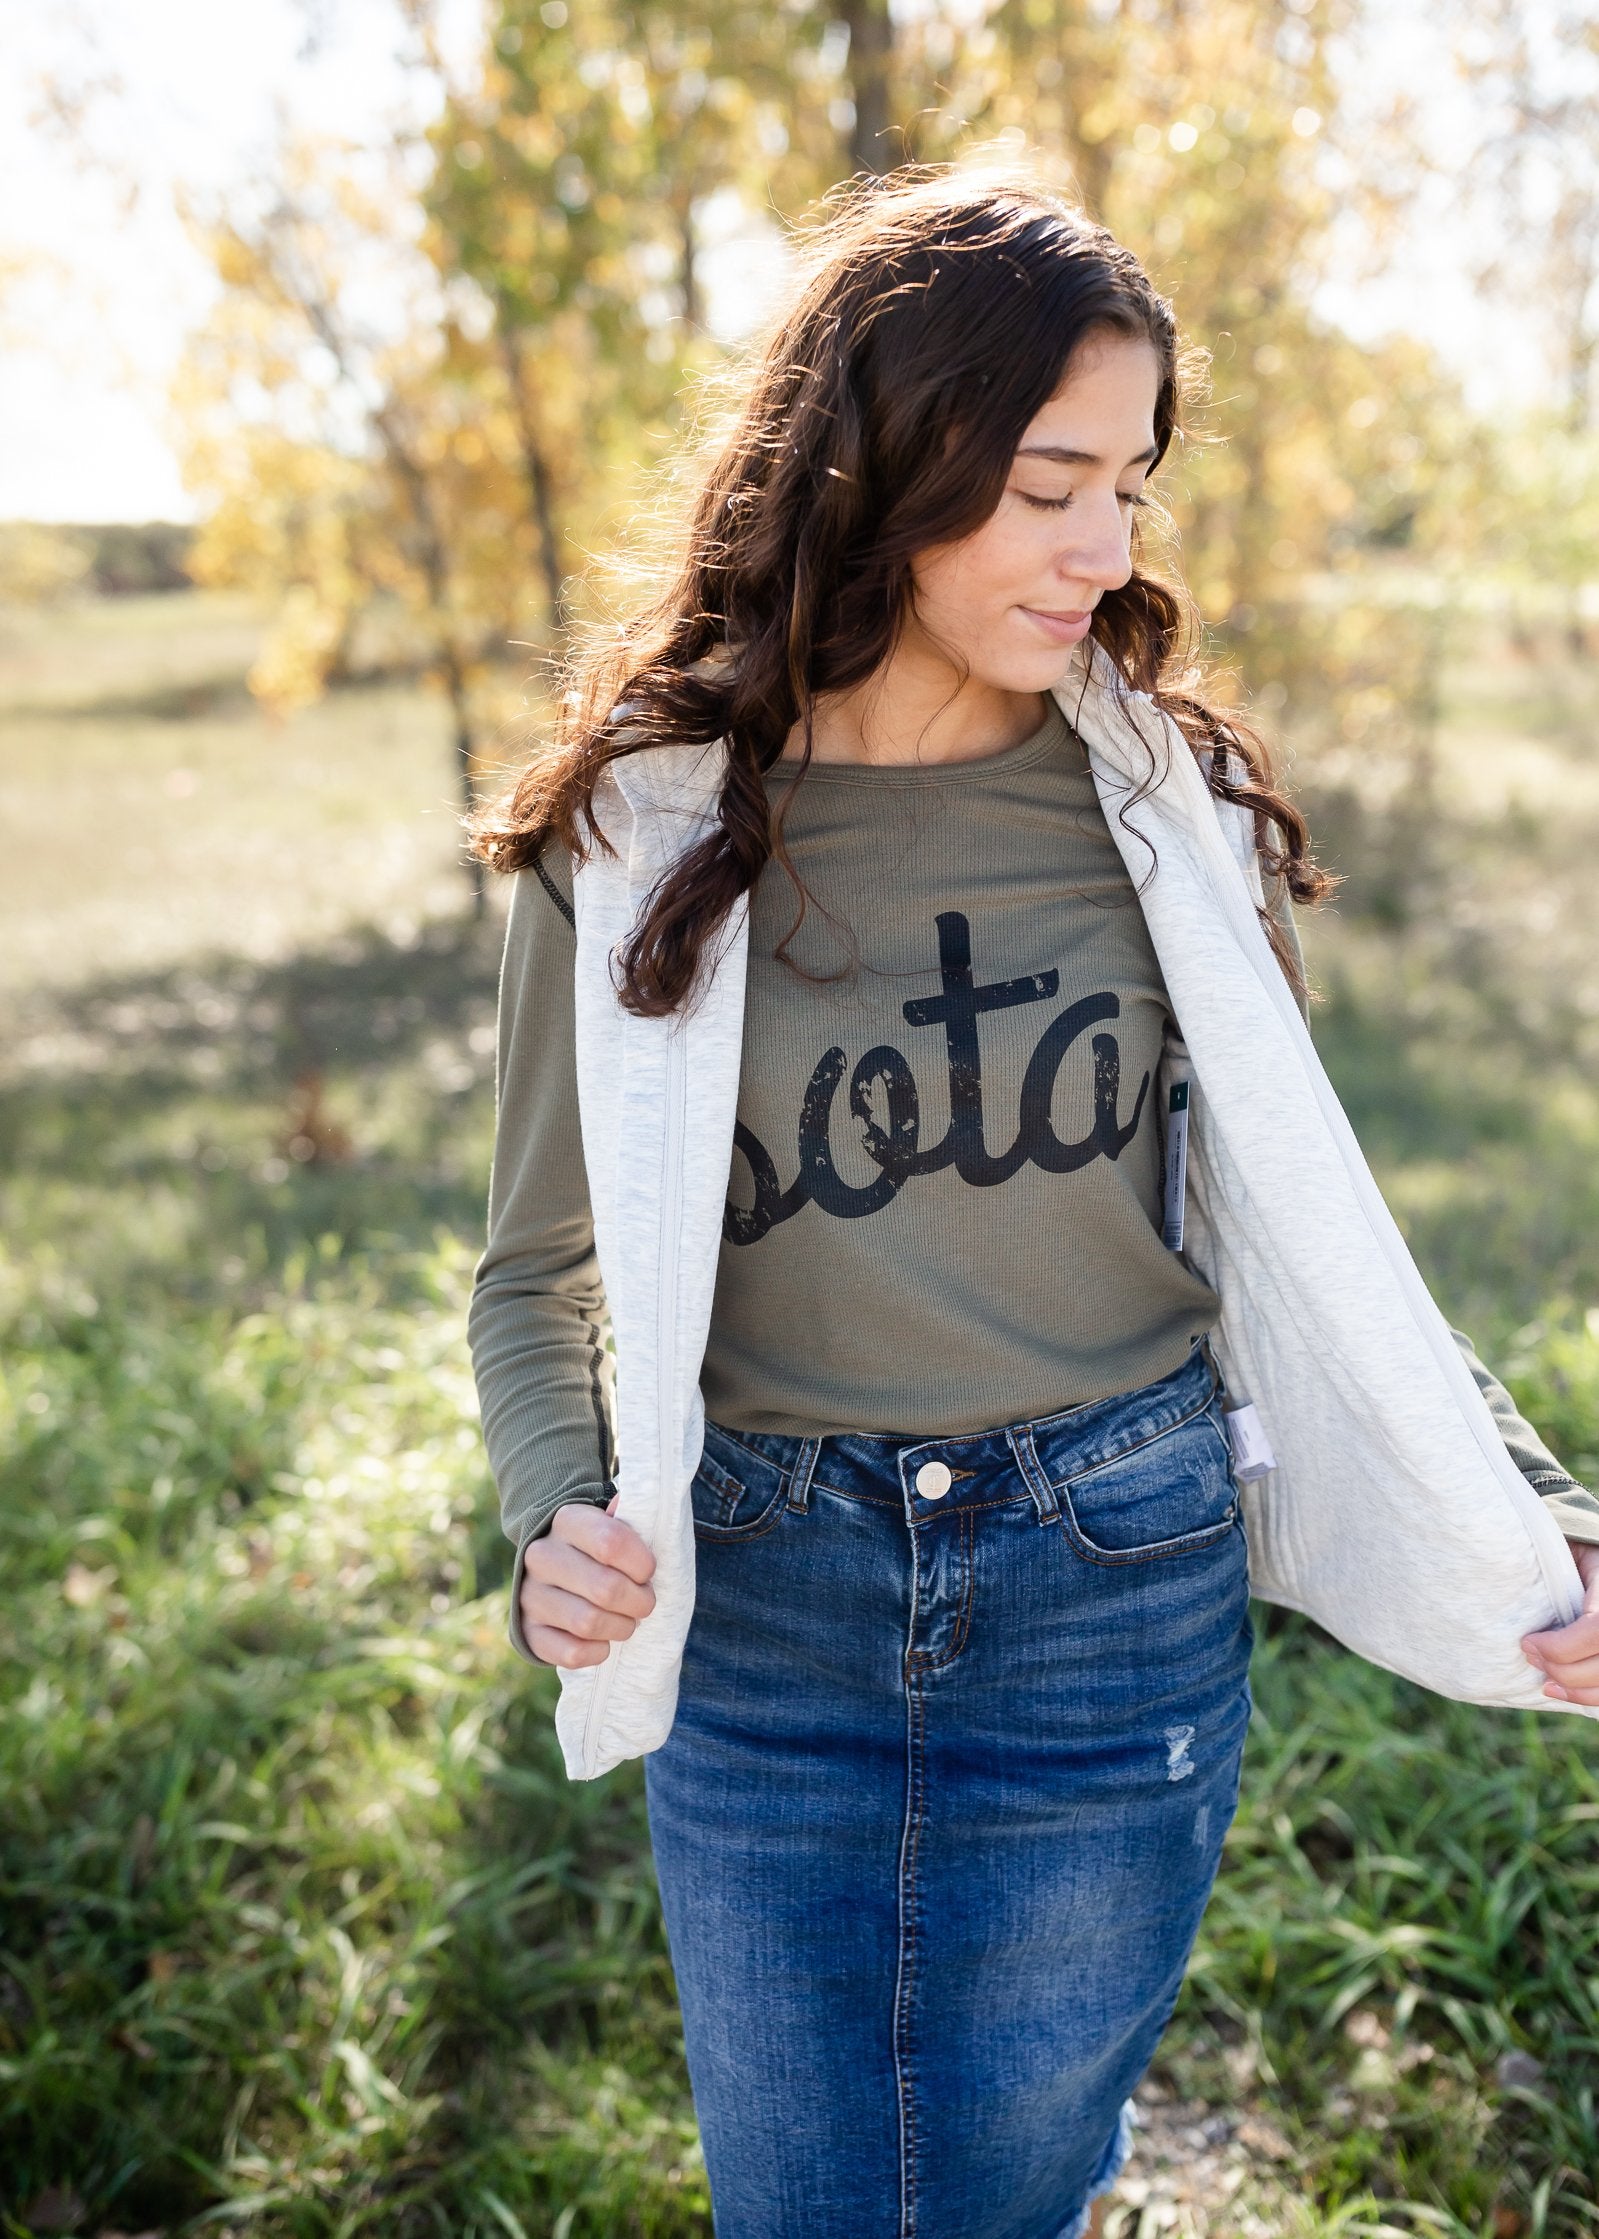 Sota' Long Sleeve Round Neck Thermal Top Tops Sota Clothing Co.